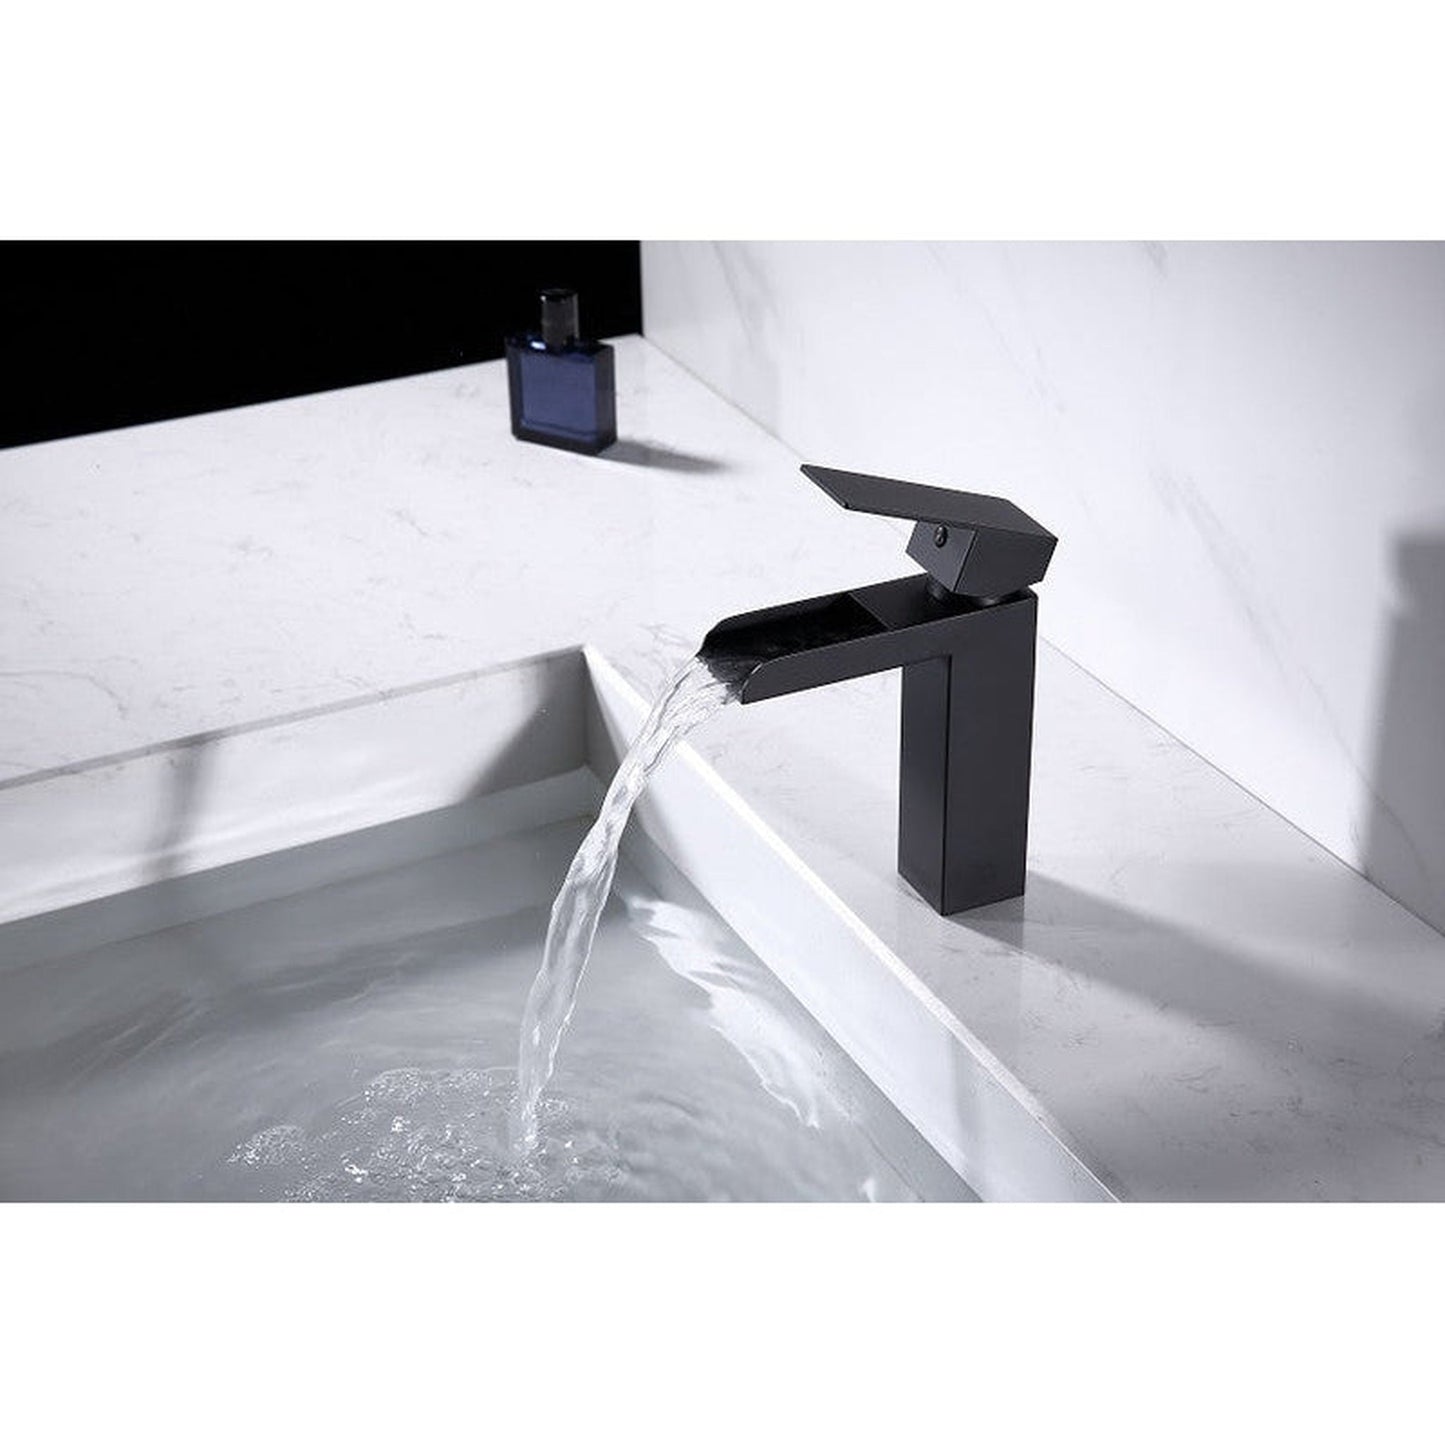 Moreno Nelli 6” x 7” Single Hole Brushed Nickel Waterfall Faucet With Red/Blue Indicators